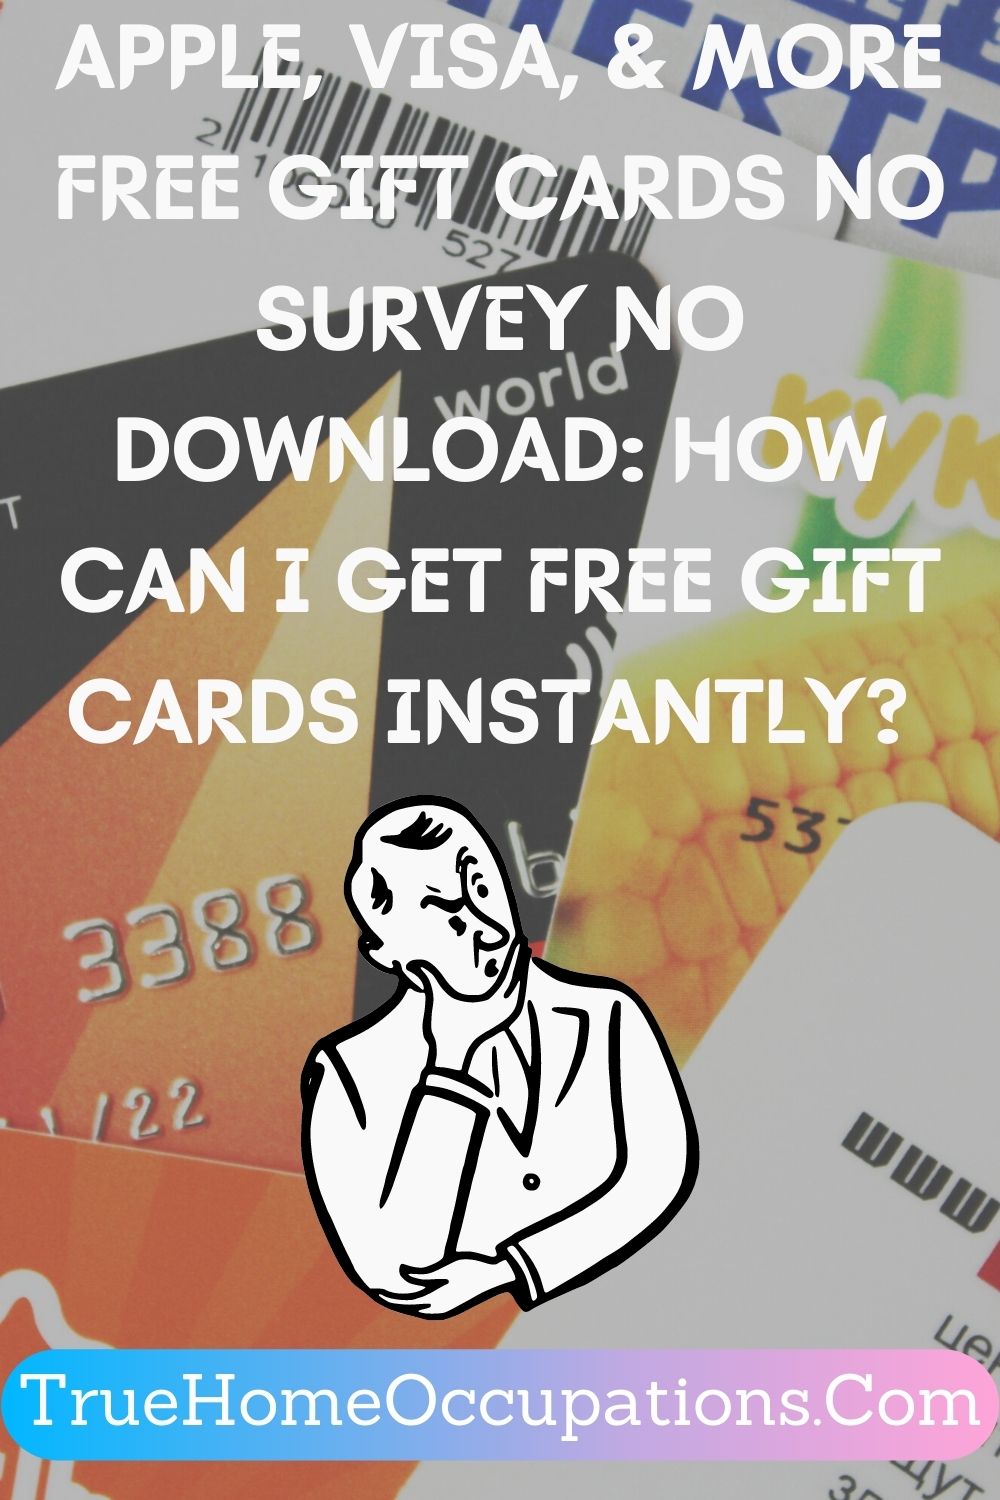 (Apple, Visa, & More) Free Gift Cards No Survey No Download: How can I get free gift cards instantly? - TrueHomeOccupations.Com